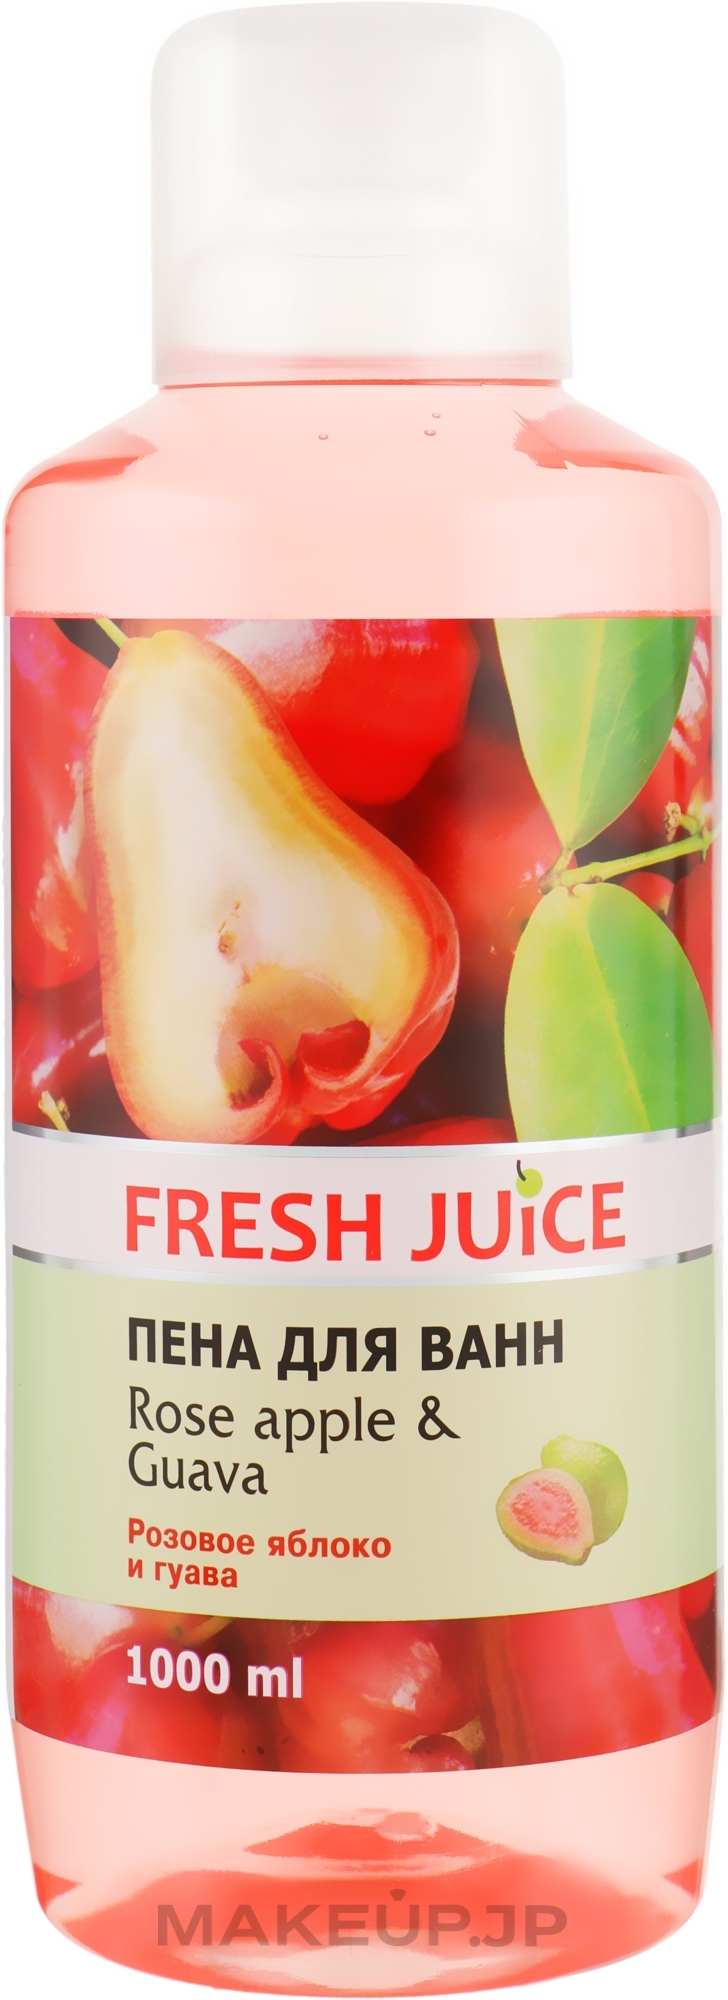 Bubble Bath "Rose Apple and Guava" - Fresh Juice Rose Apple and Guava — photo 1000 ml